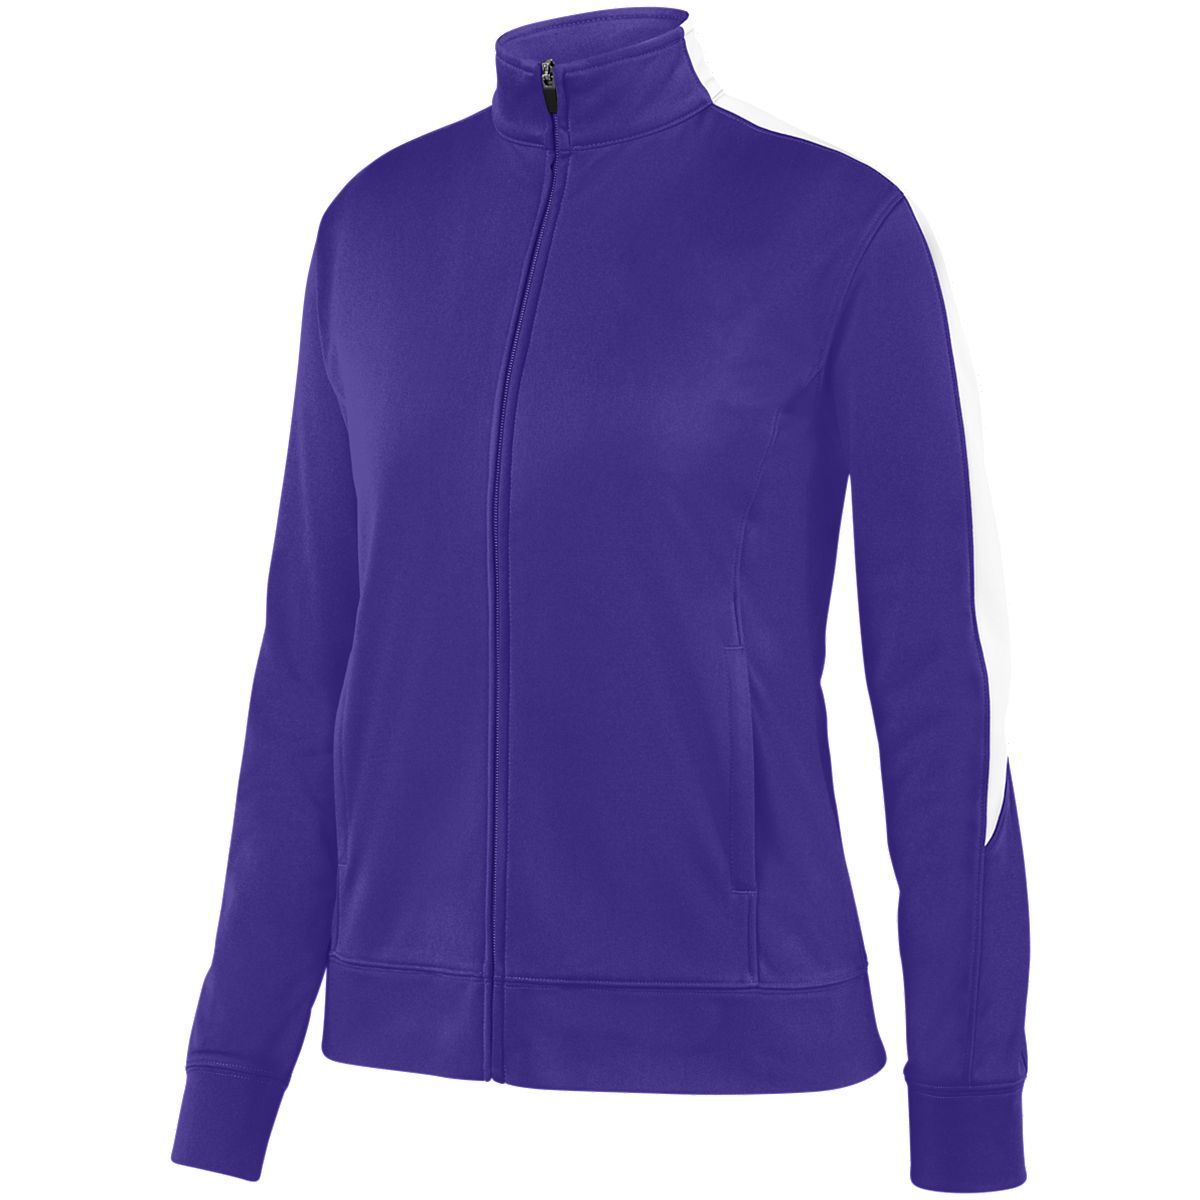 Augusta Sportswear Ladies Medalist Jacket 2.0 in Purple/White  -Part of the Ladies, Ladies-Jacket, Augusta-Products, Outerwear product lines at KanaleyCreations.com